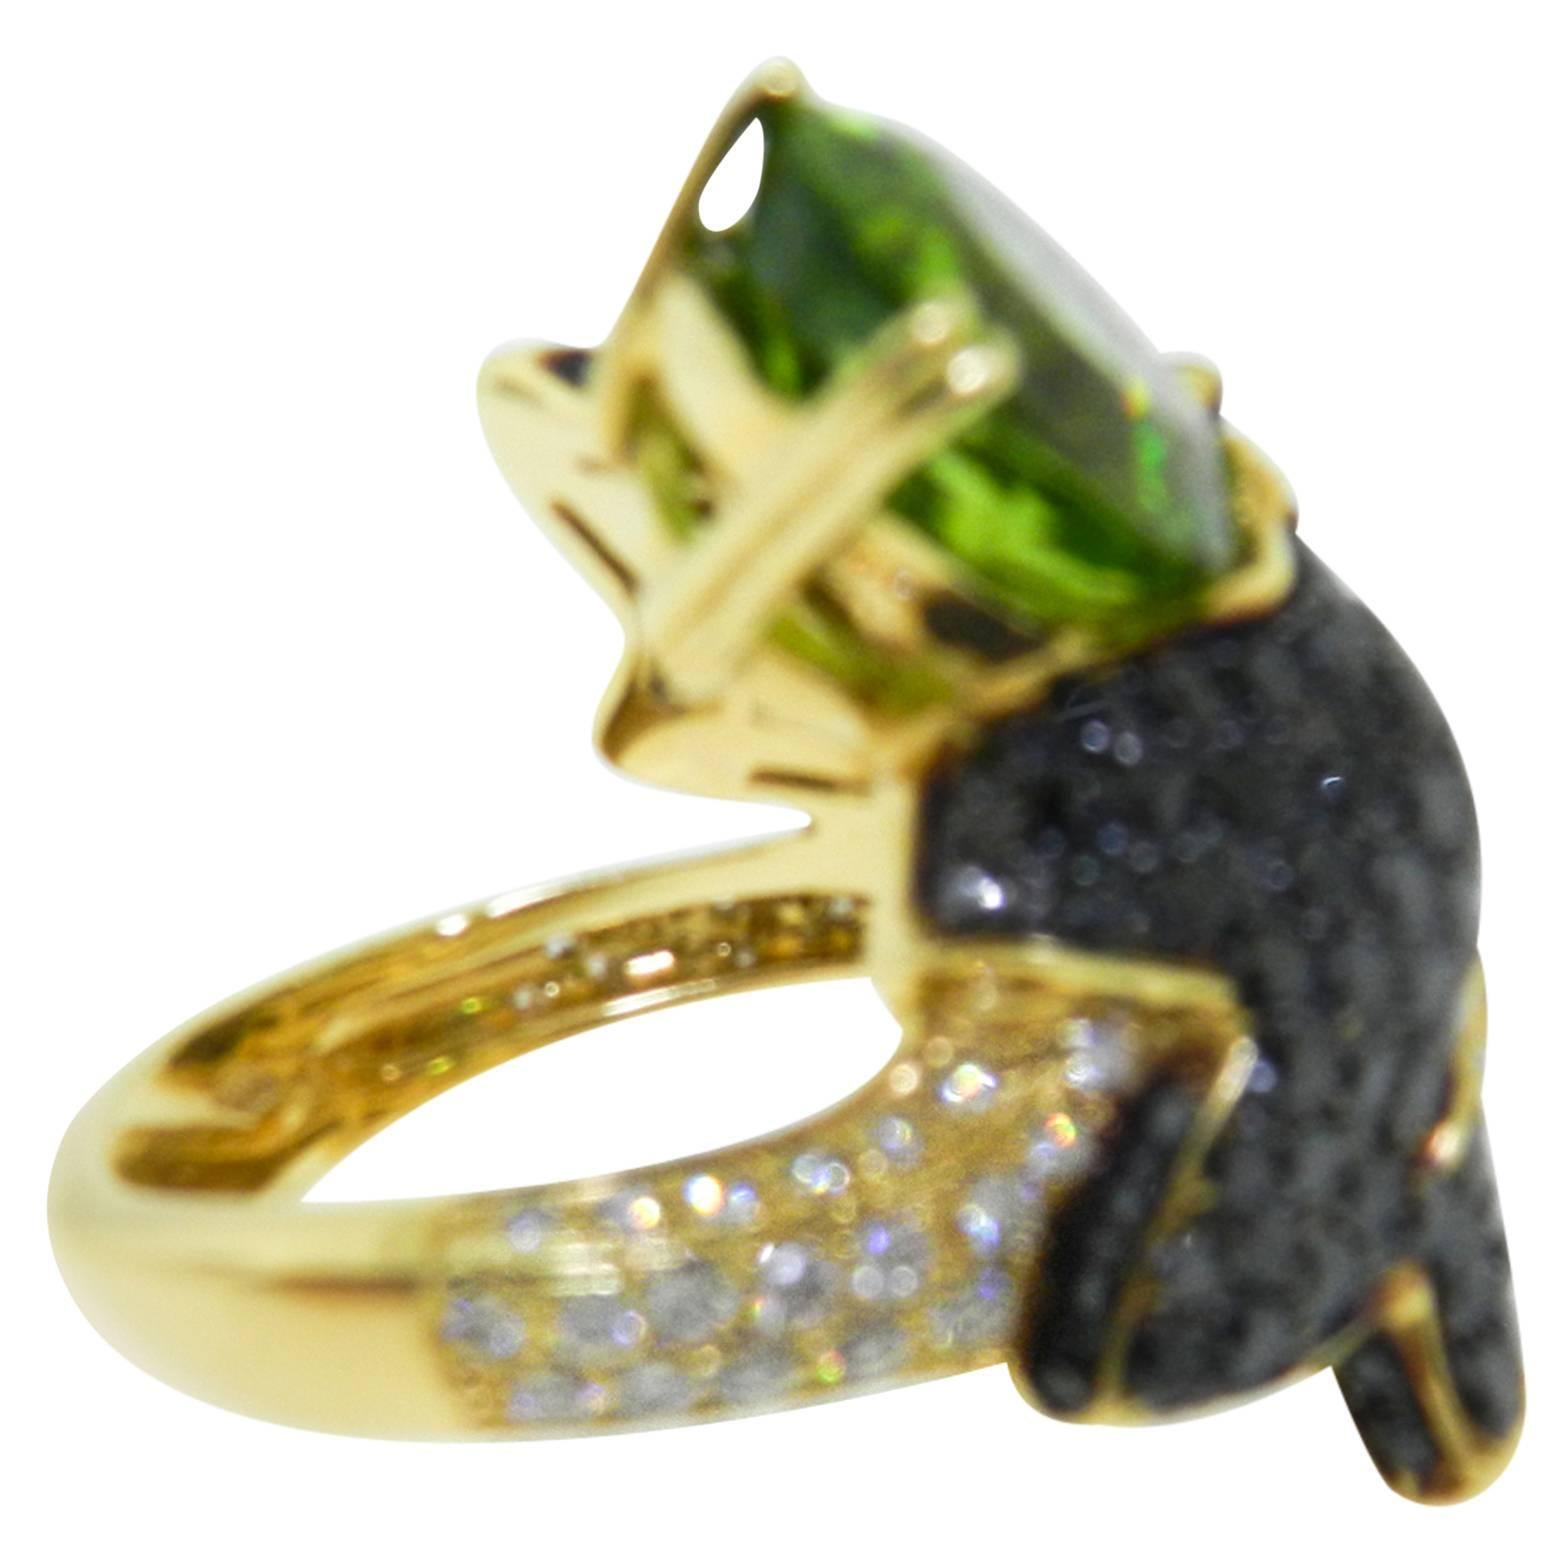 Stunning Cocktail ring, centering an oval-shaped peridot weighing approximately 1.40 carats, with a black pave diamond leaves, with a pavé-set white diamond style band, the diamonds altogether weighing approximately 0.74 total carats, mounted in